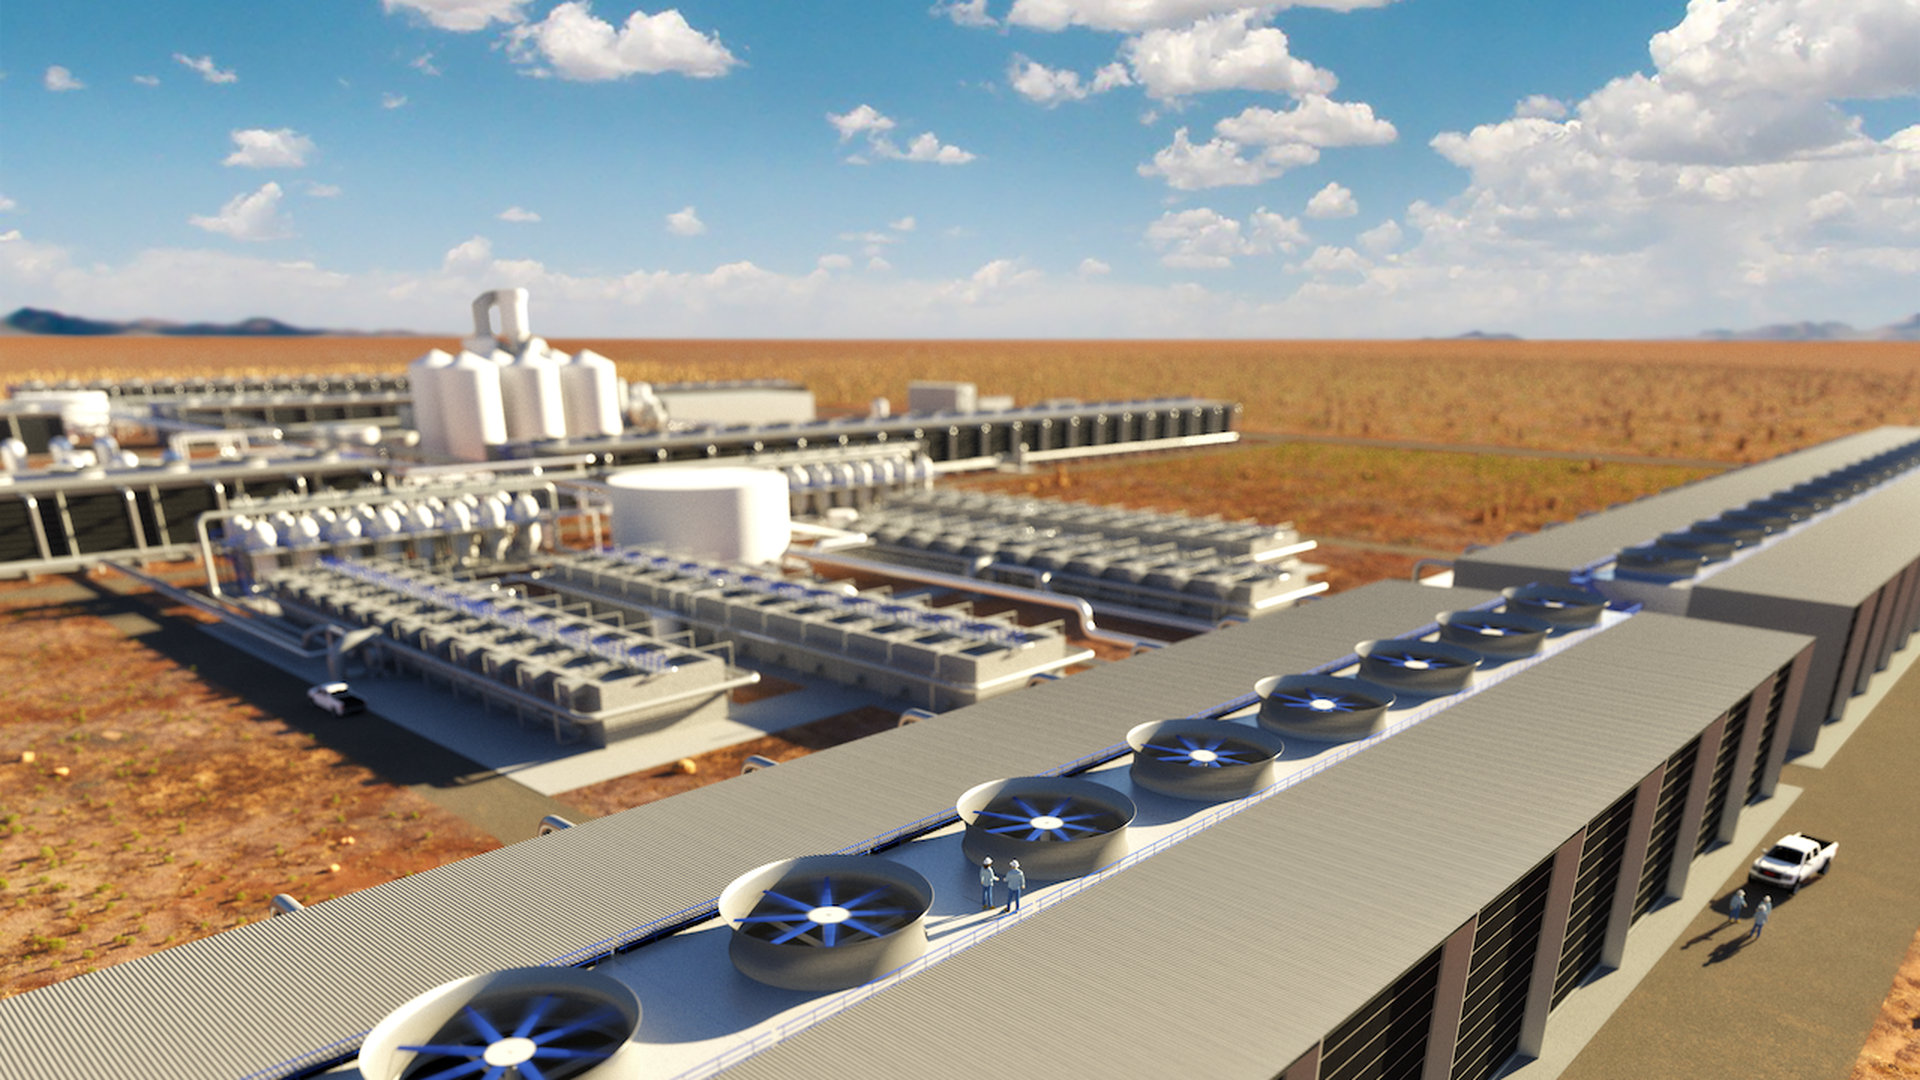 Artist's rendering of Carbon Engineering's planned direct air capture plant in the Permian Basin.